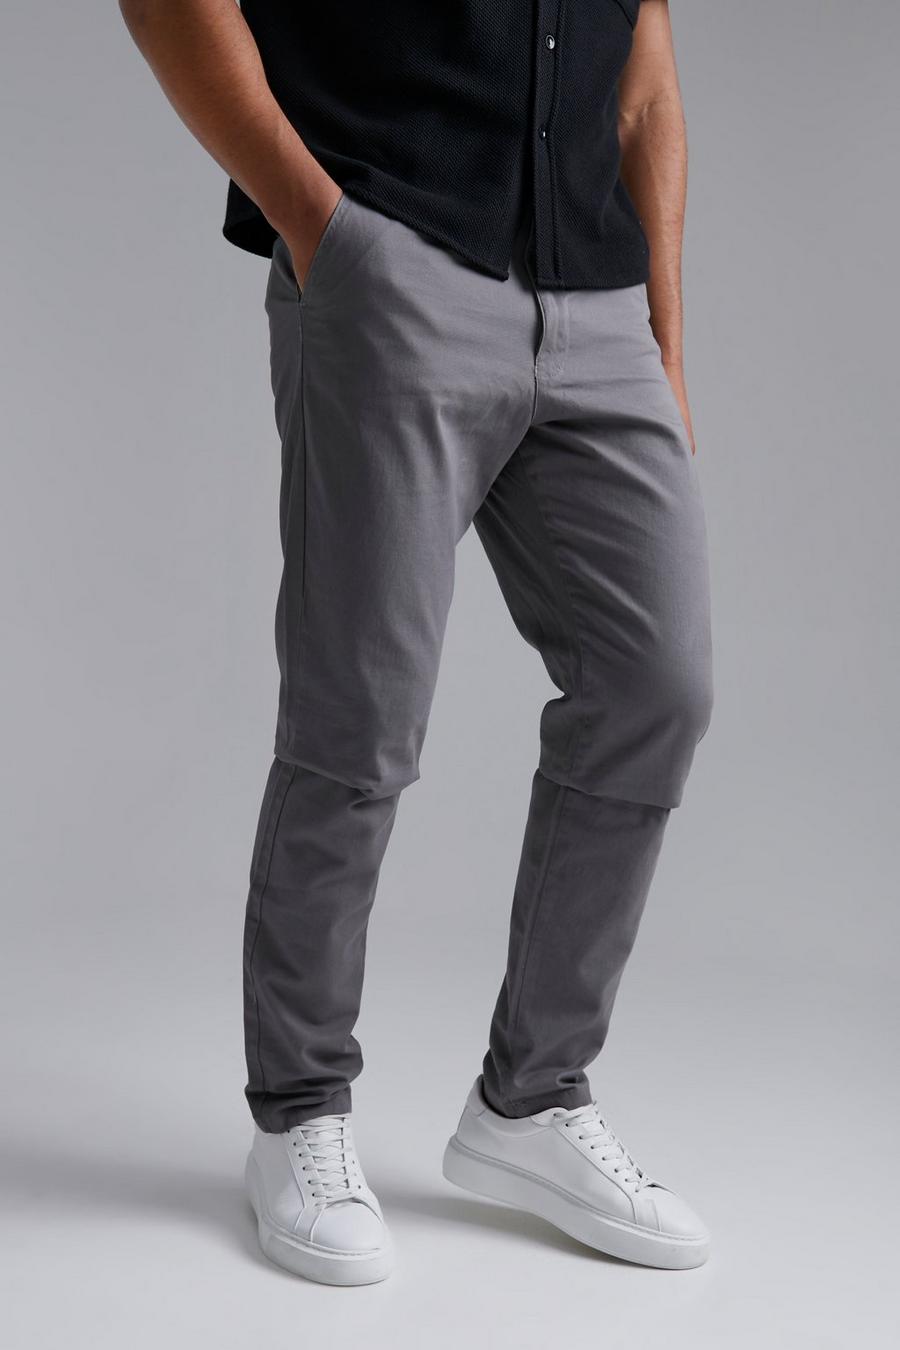 Charcoal gris Tall Slim Fit Chino Broek